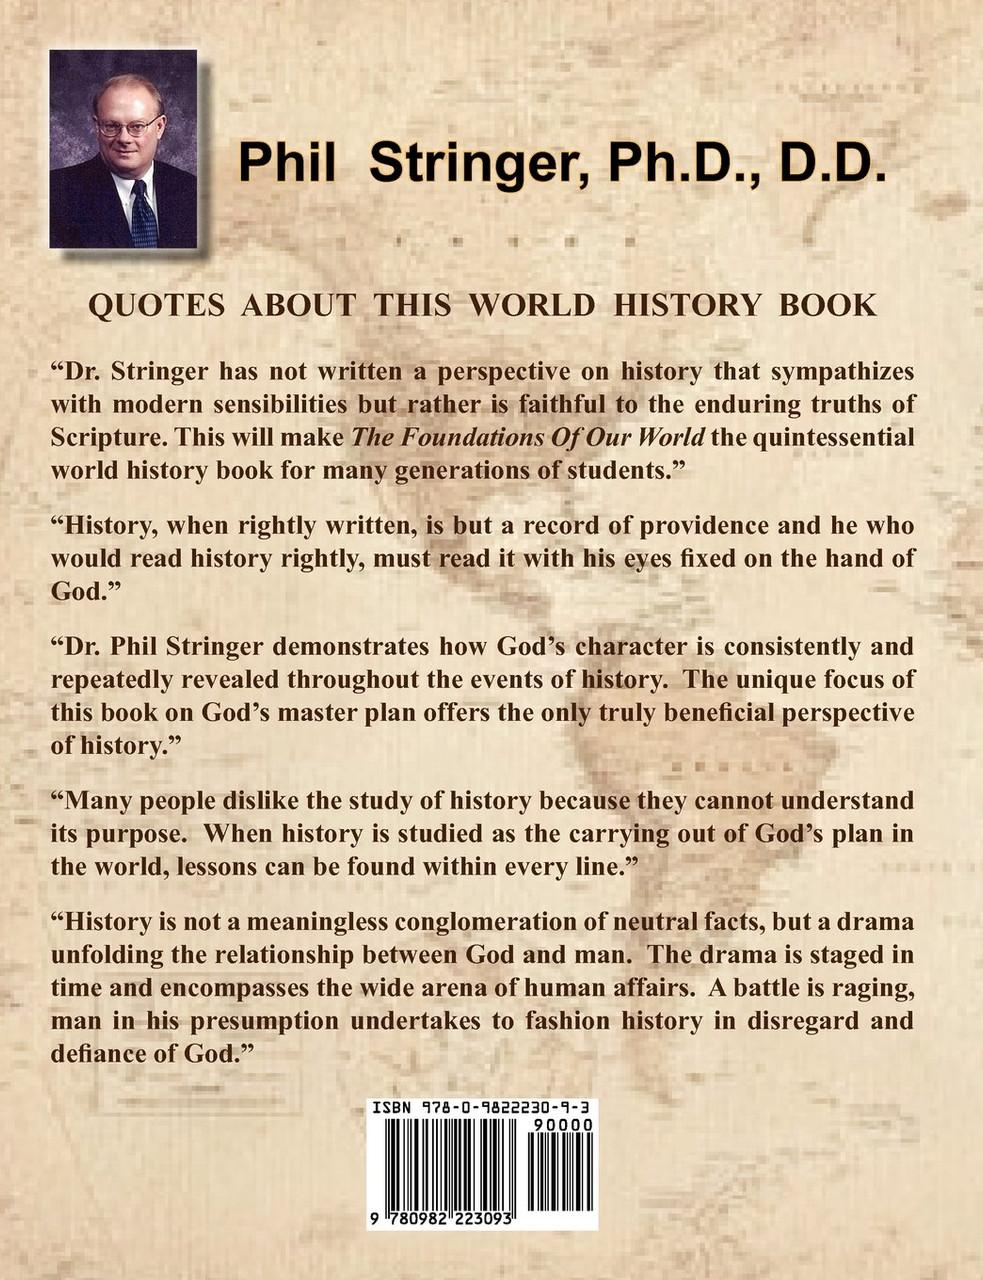 World:　Volume　Phil　The　Stringer　by　Dr.　Foundations　Our　of　1,